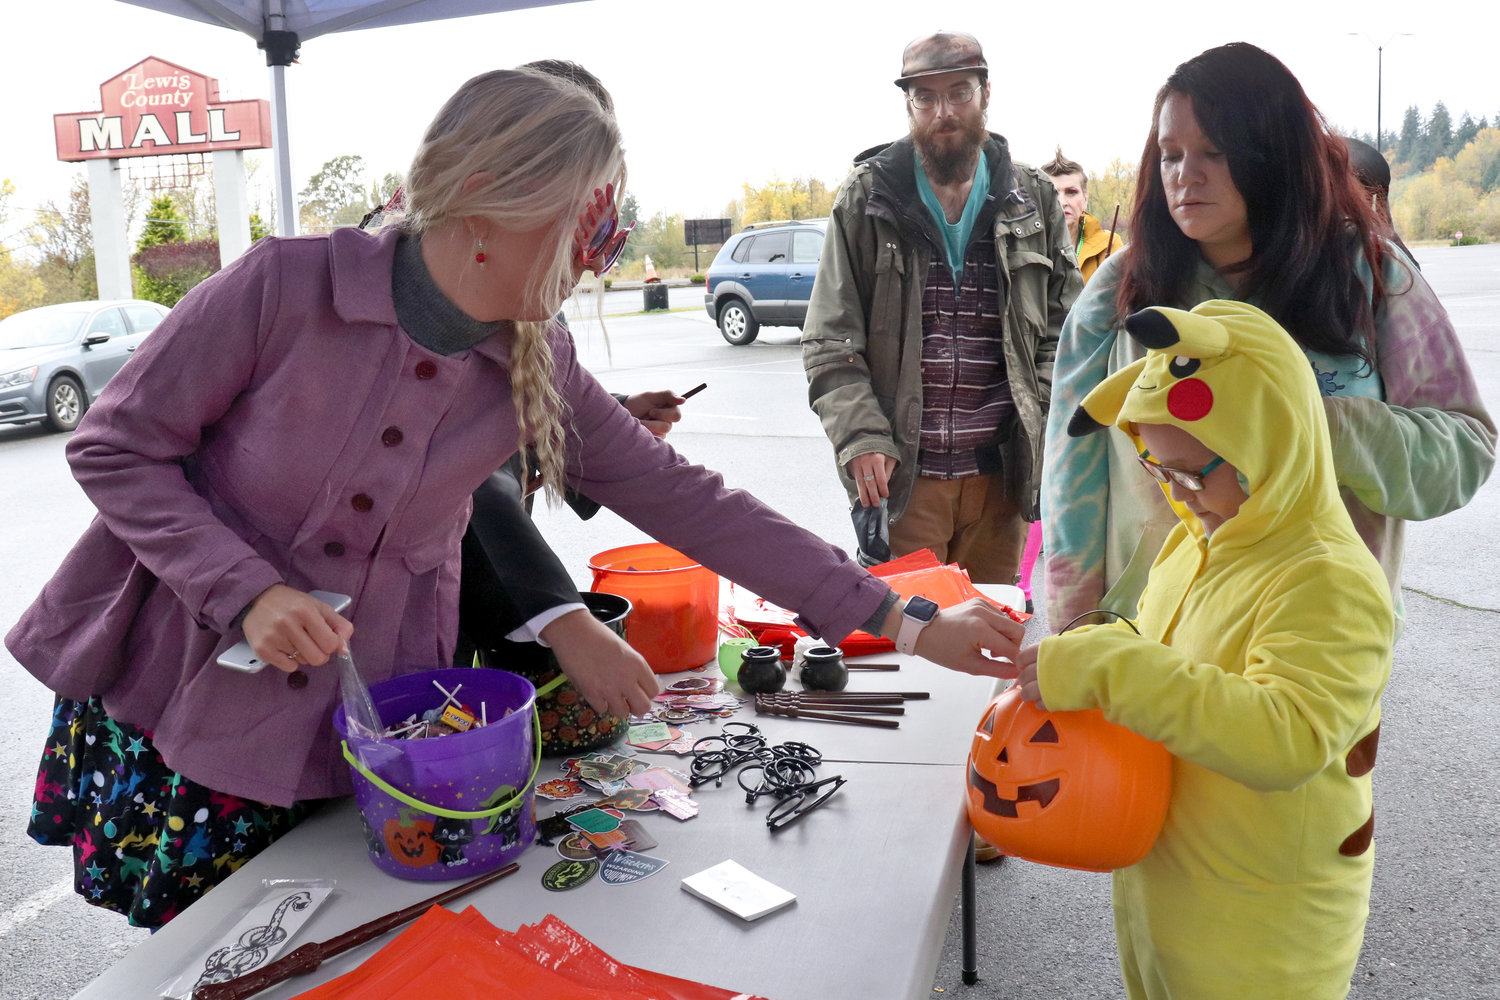 Twin Transit staff hand out candy and stickers to trick-or-treaters in the Trick or Treat Transit bus boarding area at the Lewis County Mall on Monday.